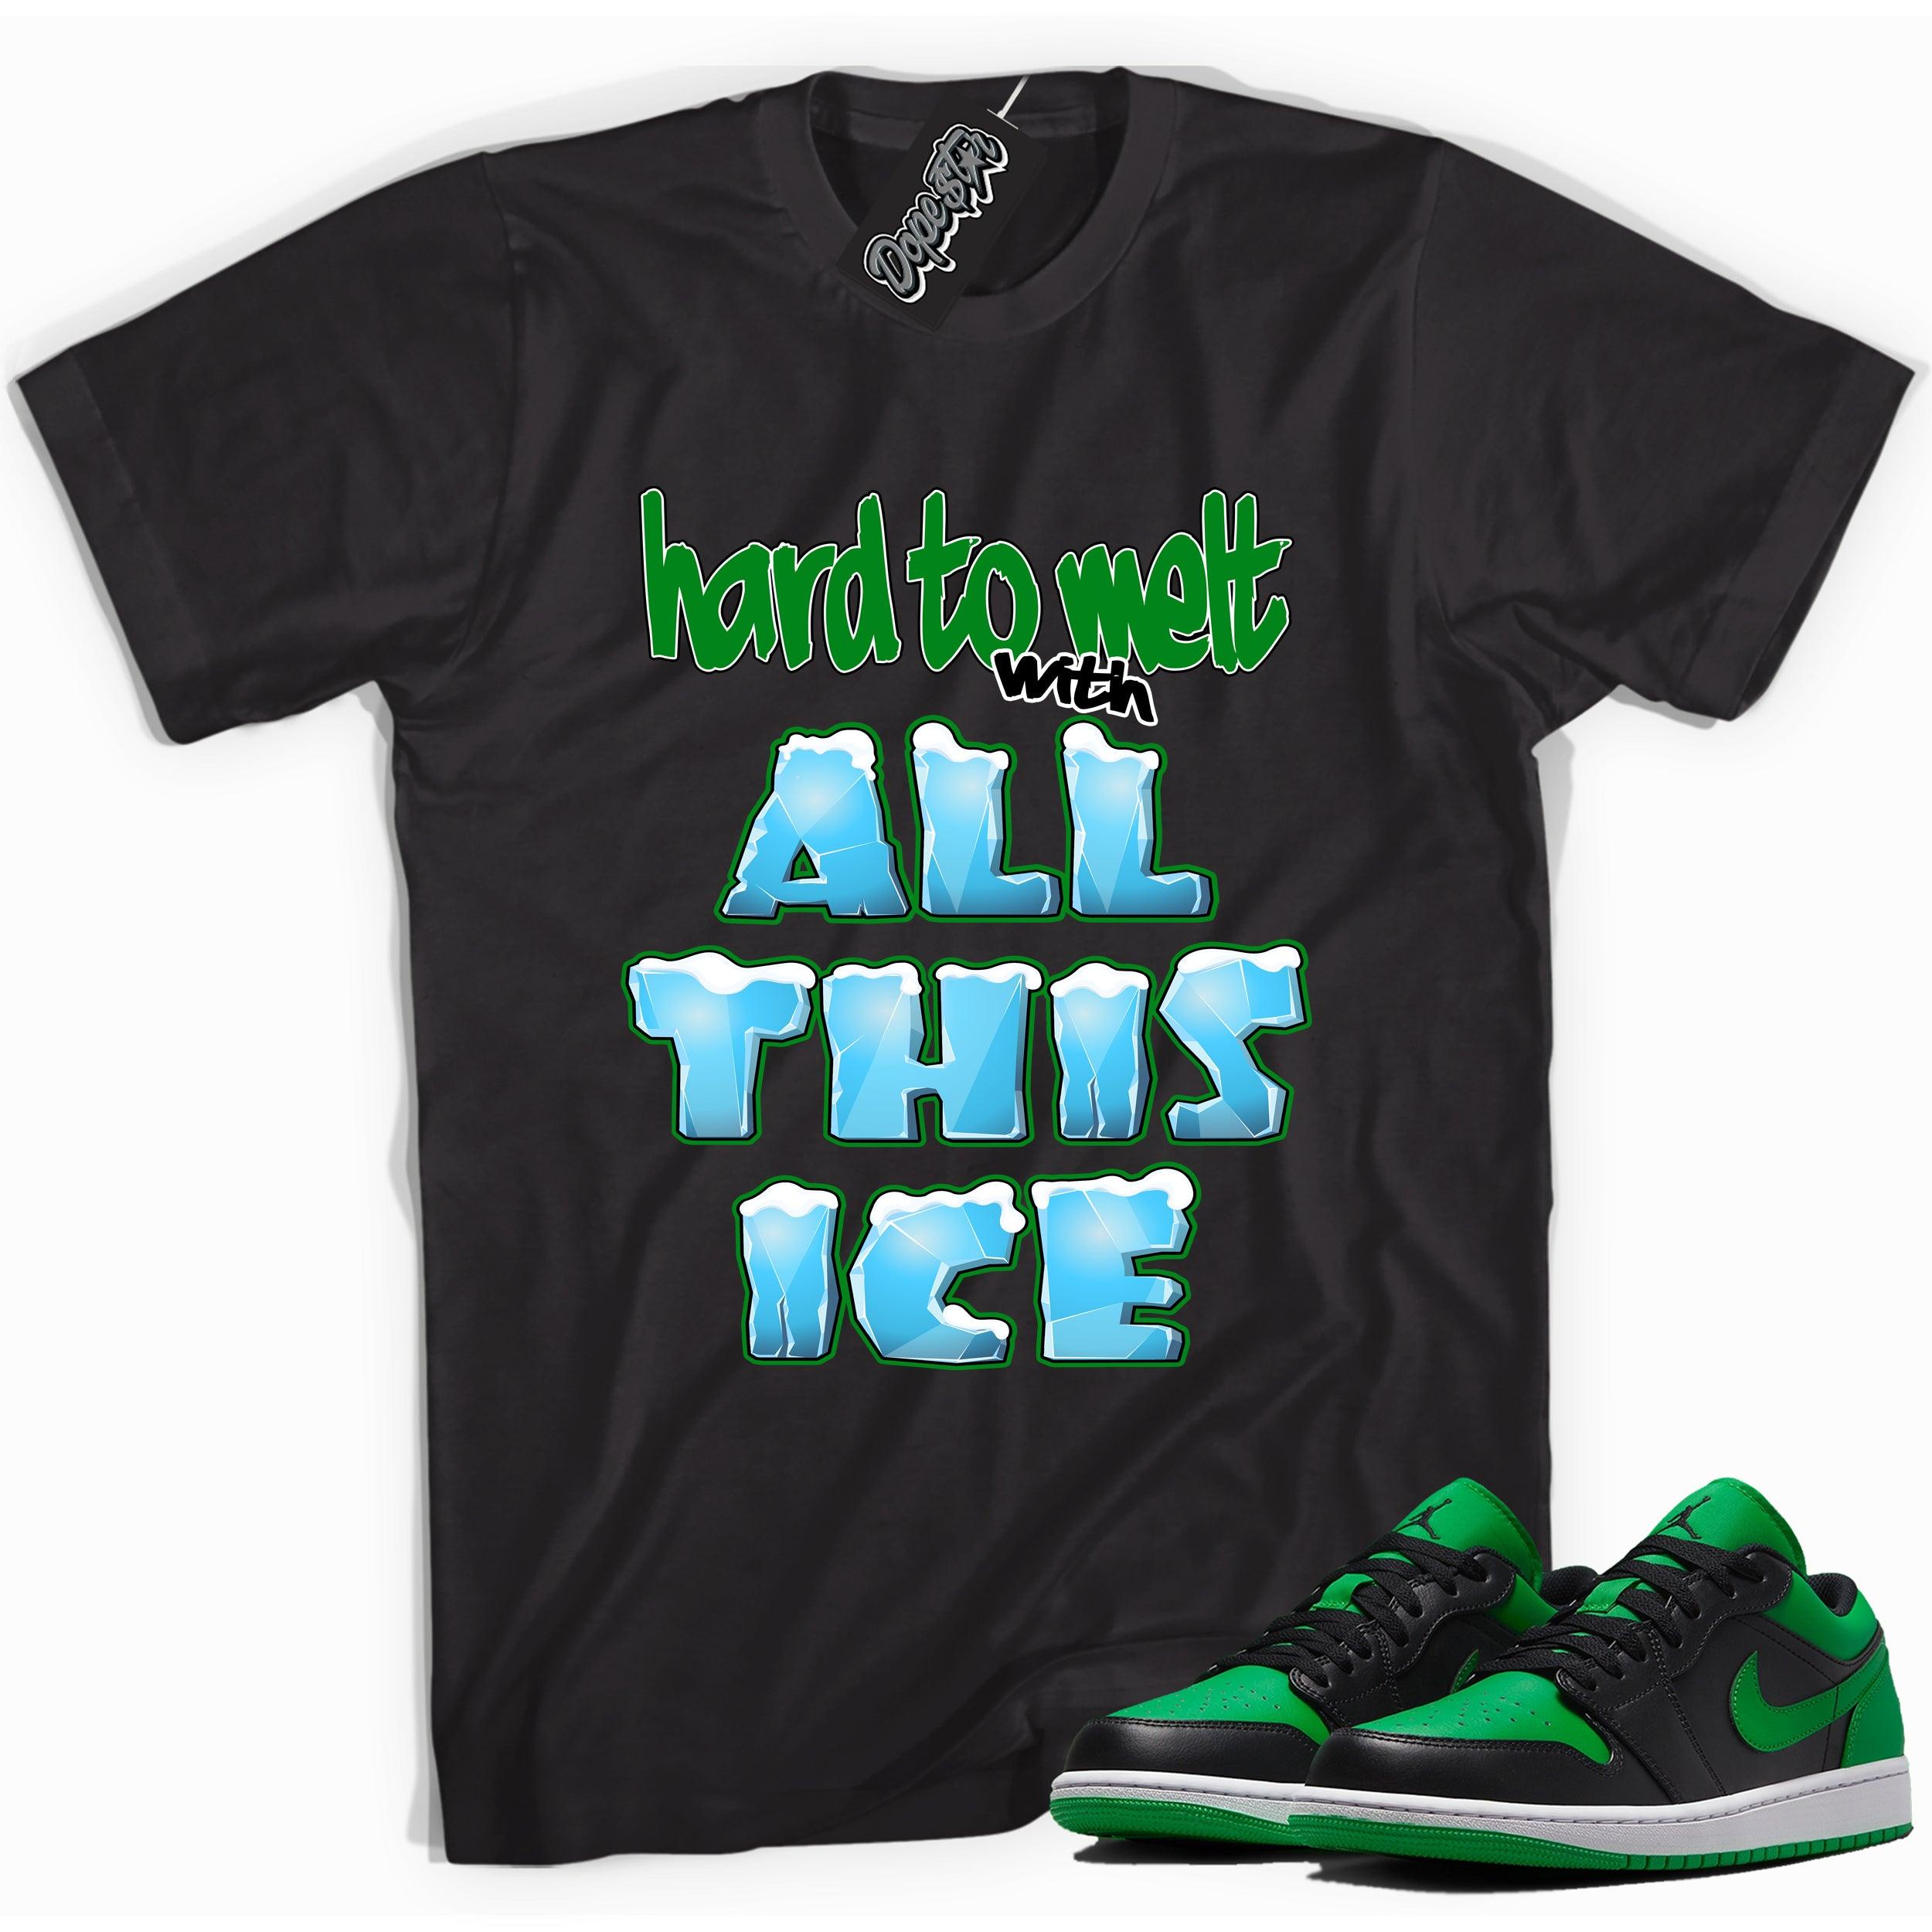 Cool black graphic tee with 'All This Ice' print, that perfectly matches Air Jordan 1 Low Lucky Green sneakers